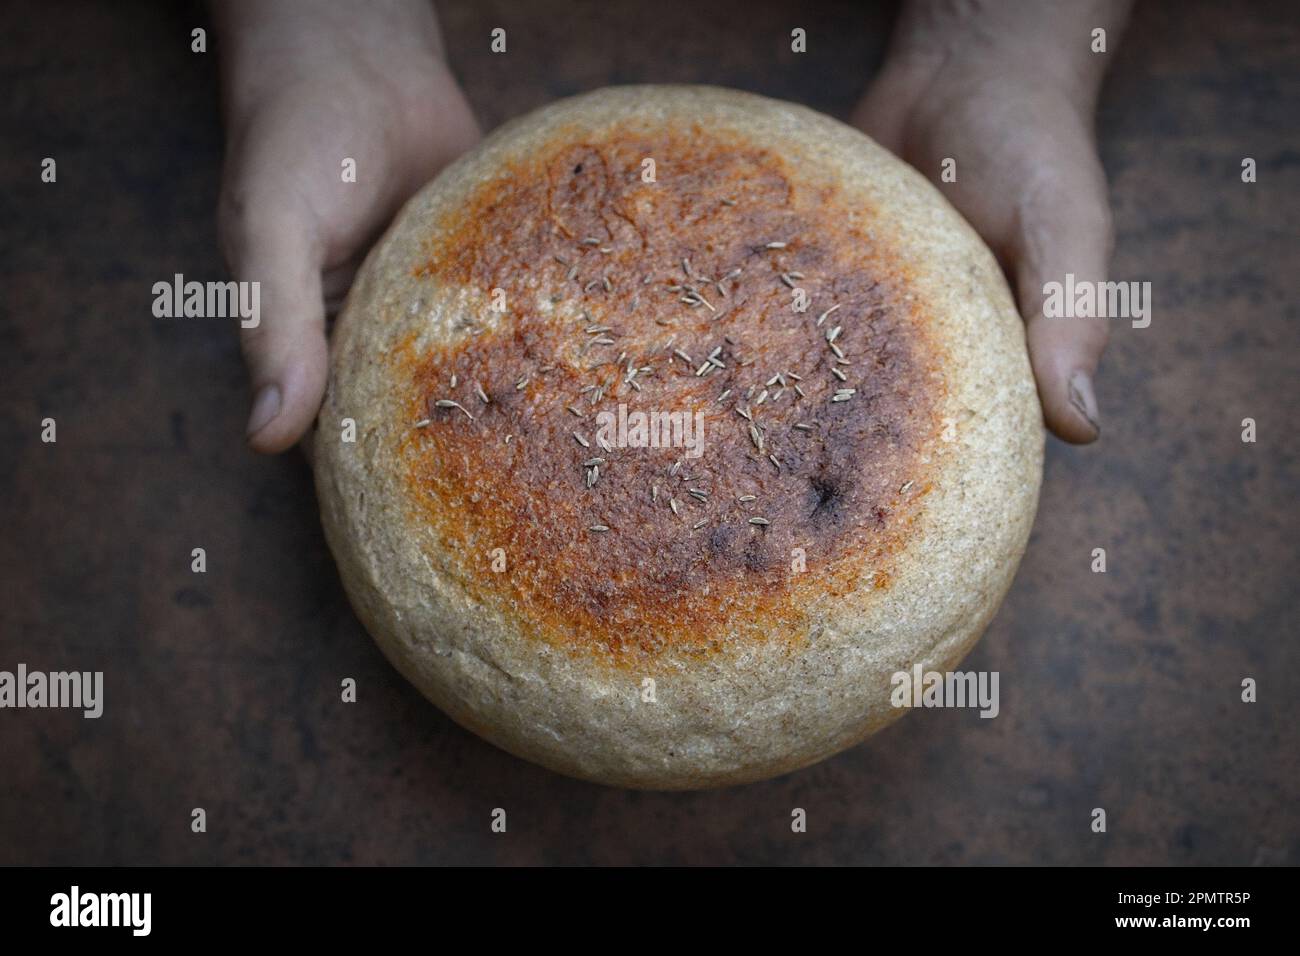 Homemade crusty loave of bread on wooden background. Baker holding fresh bread in the hands. Still life concept. Dark mood.view from above Stock Photo